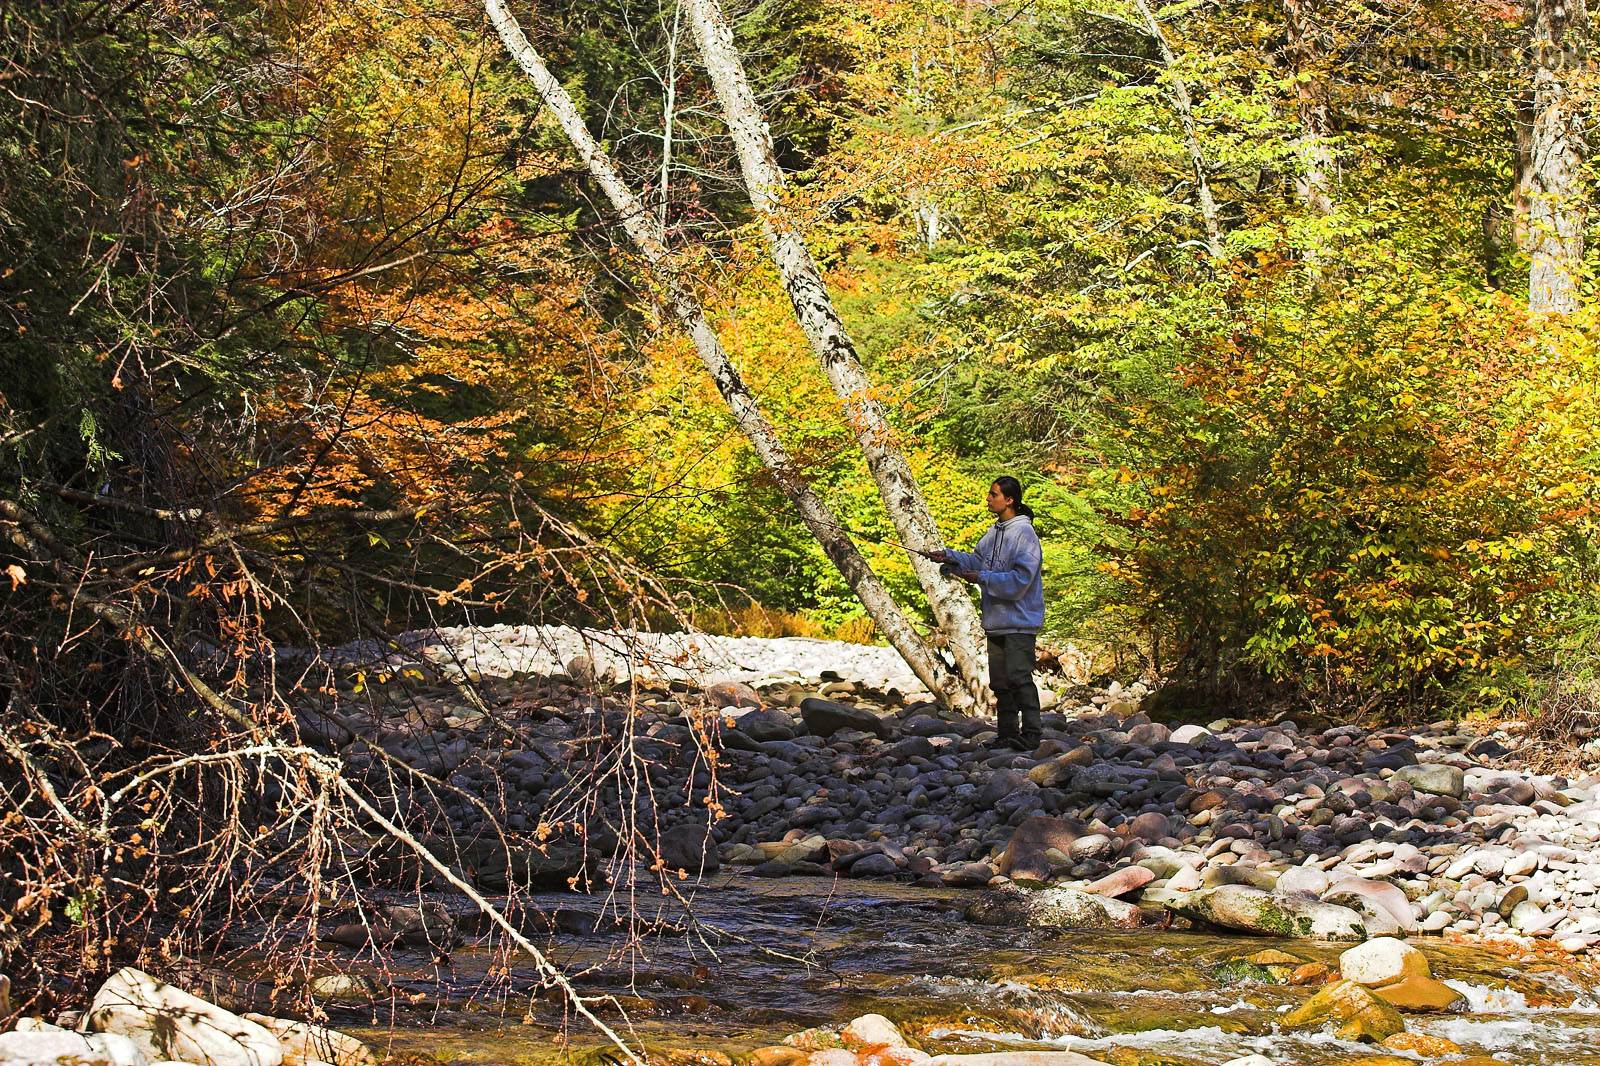 Lena fishing a nice hole. From the Mystery Creek # 23 in New York.